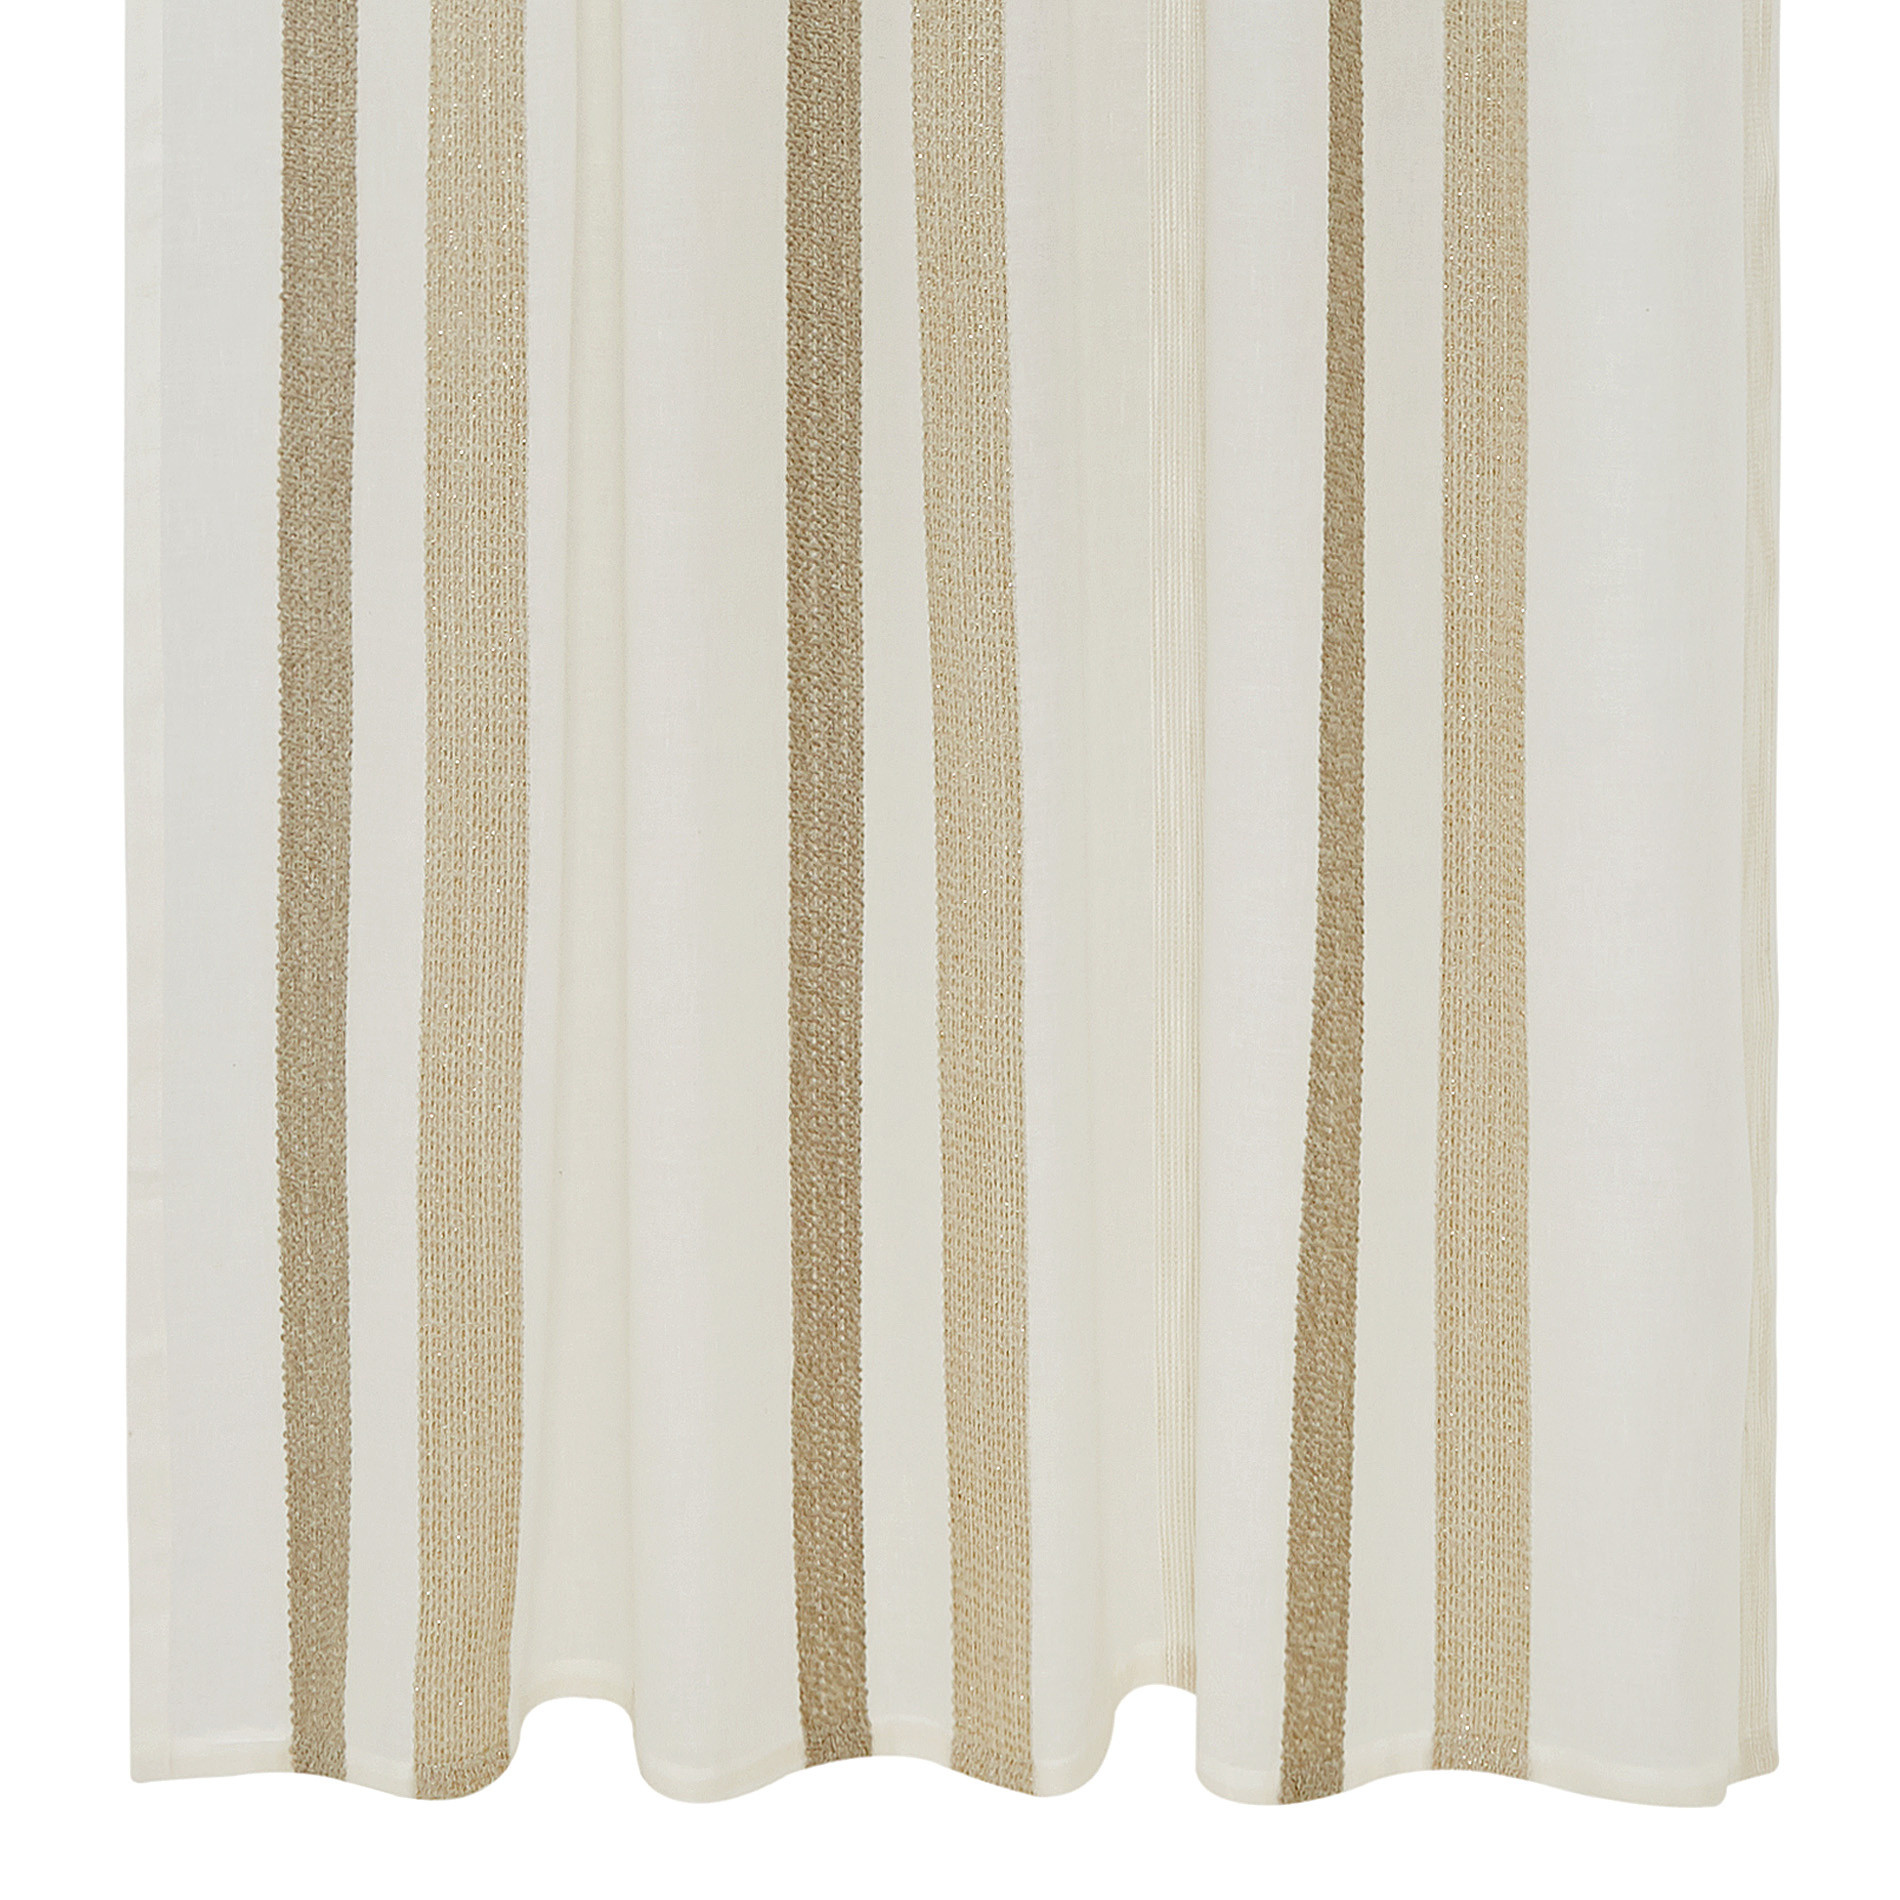 Curtain fabric with hidden pass-through stripes, Light Beige, large image number 1